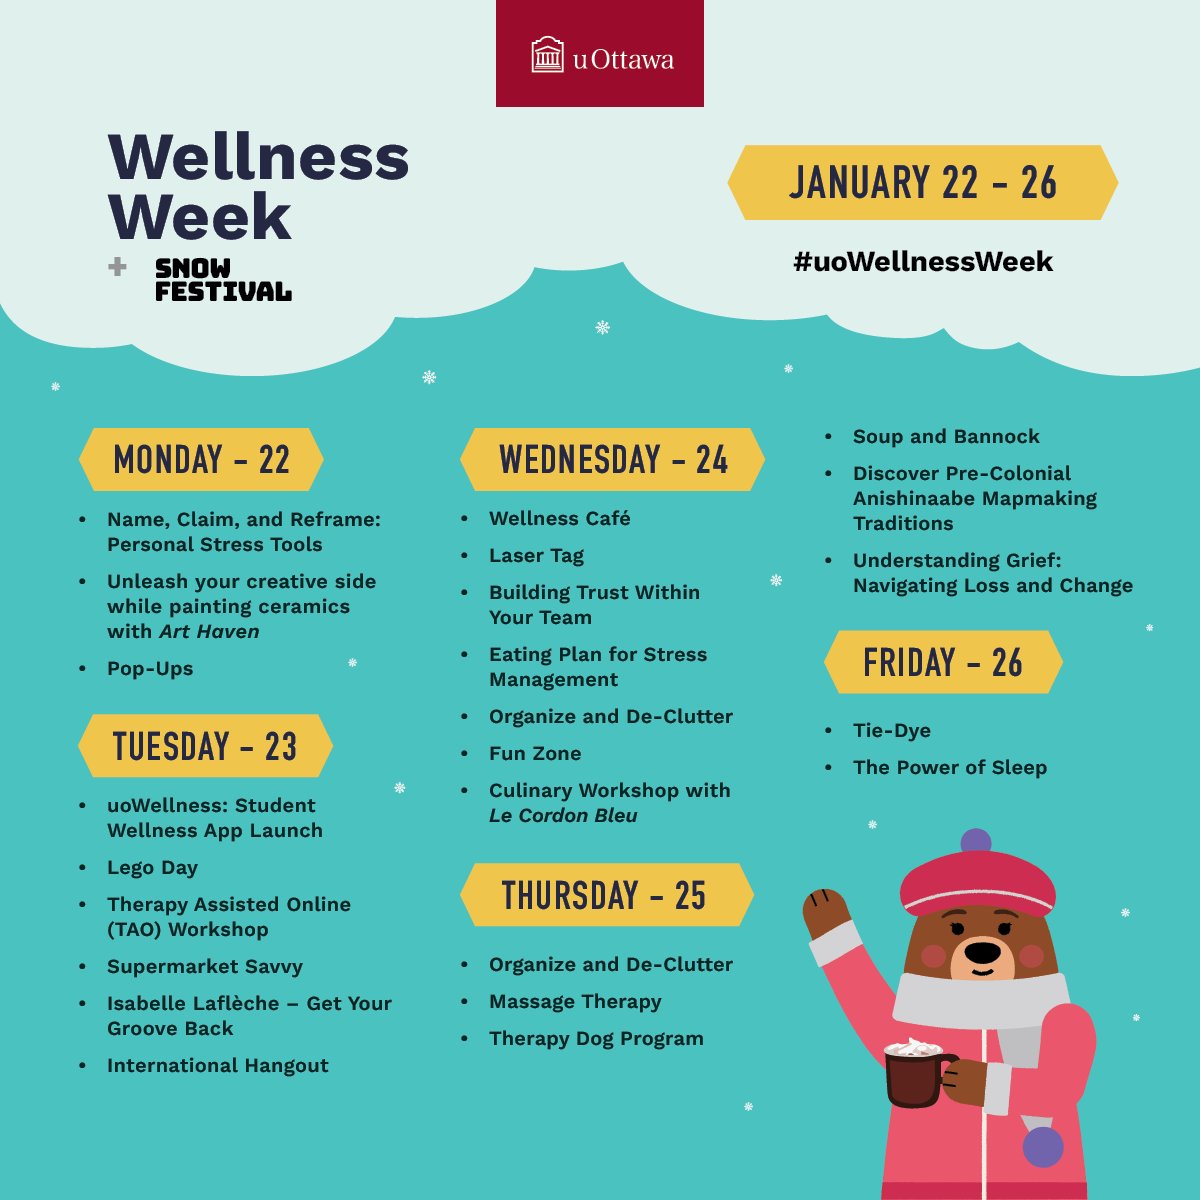 Here are some of our #uOWellnessWeek events you won't want to miss! Register by following this link: uottawa.ca/campus-life/he…